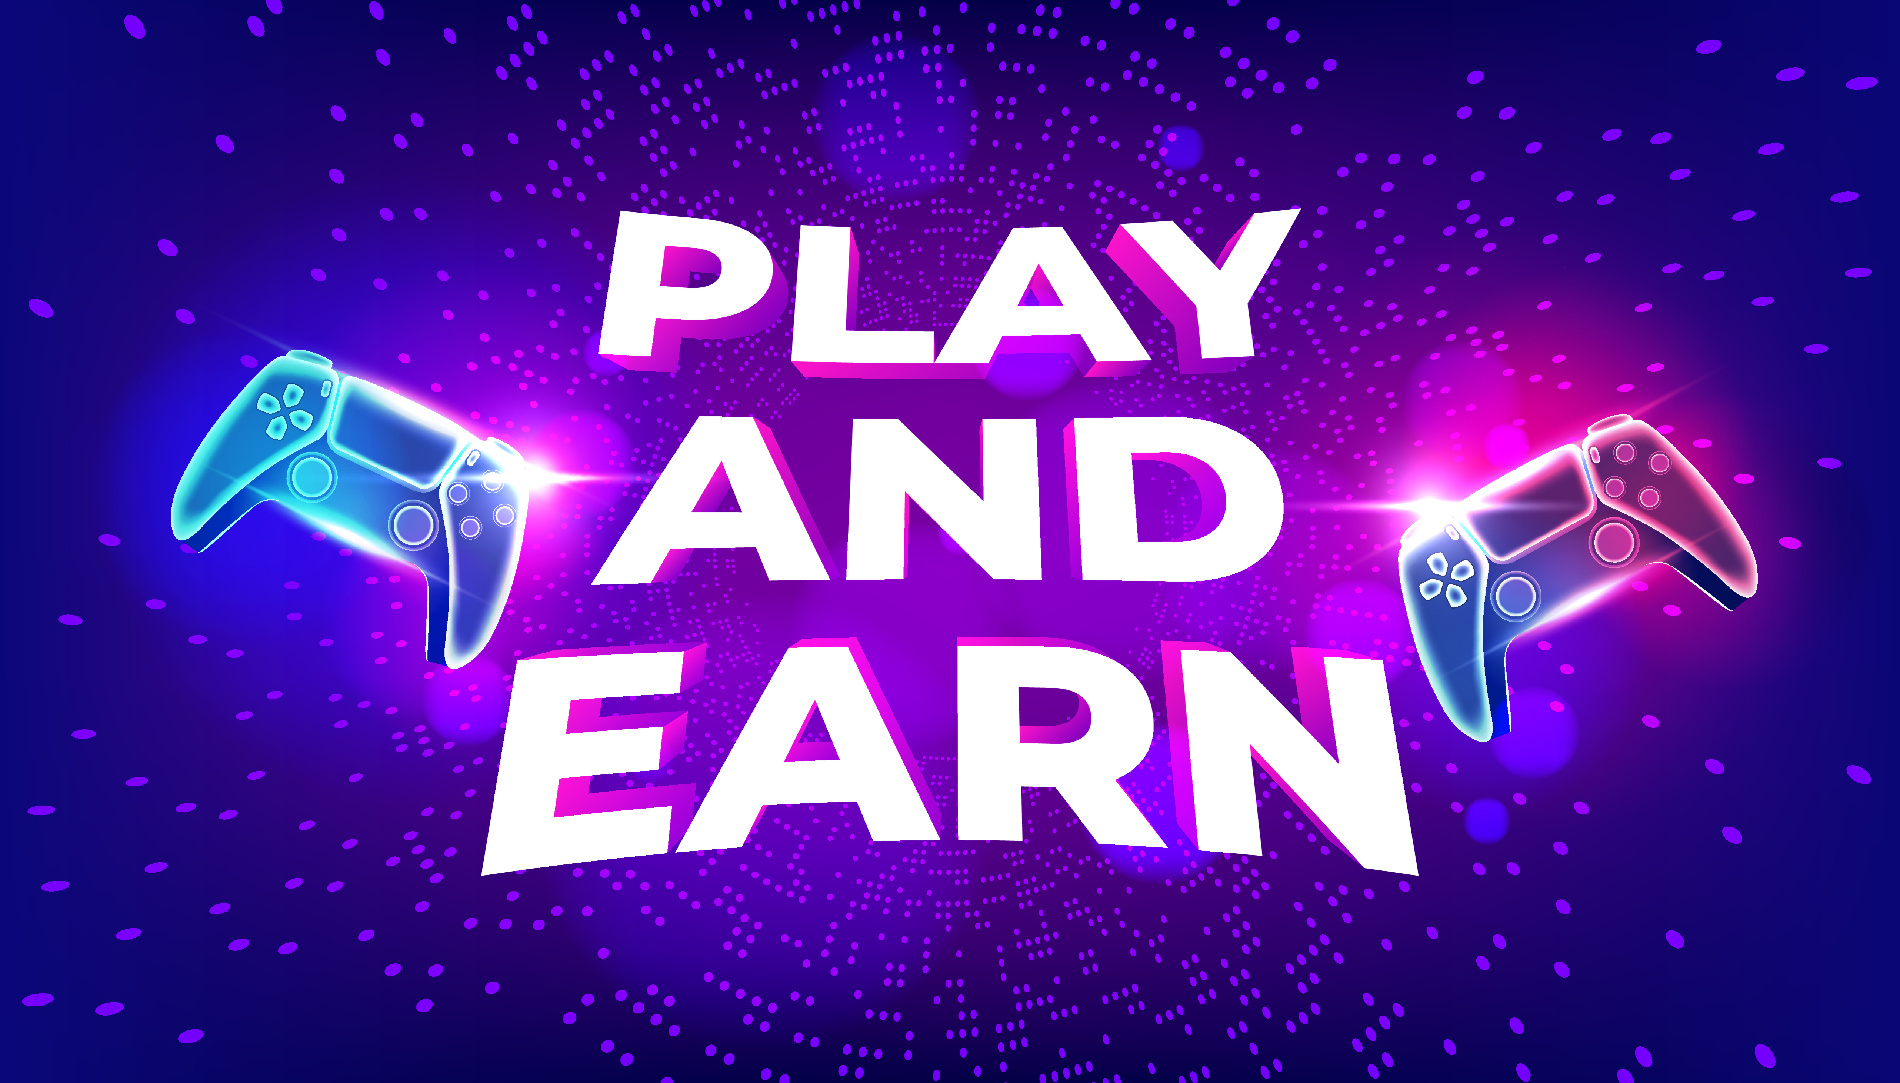 Earniverse – The first Play & Earn Metaverse